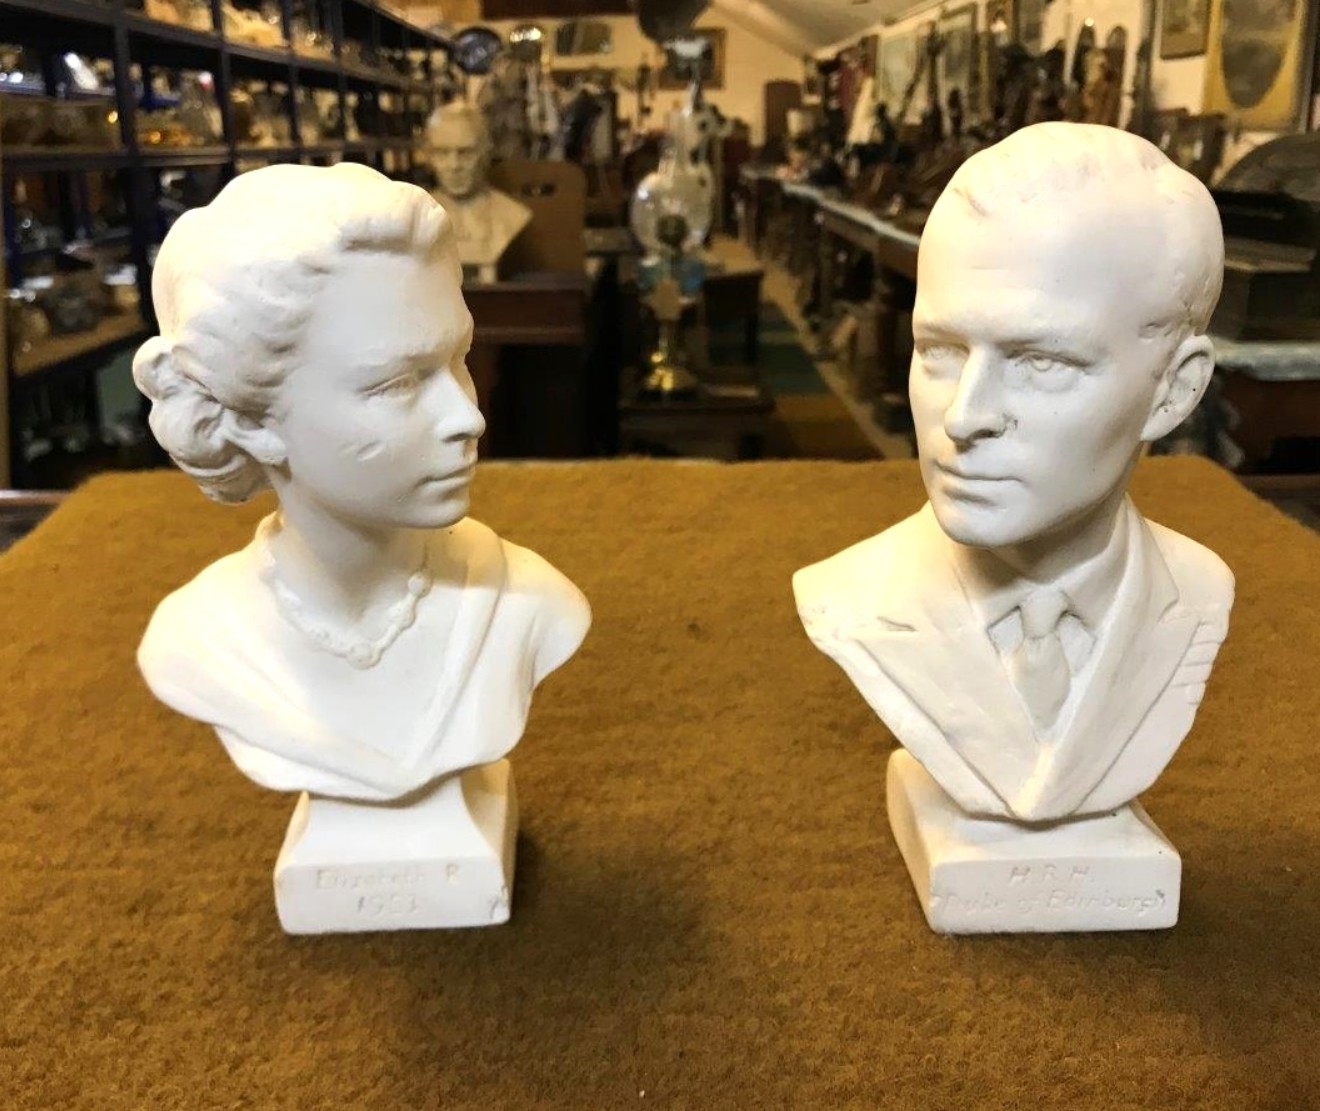 Plaster Busts Queen Elizabeth II and The Duke of Edinburgh Created for the Coronation 1953